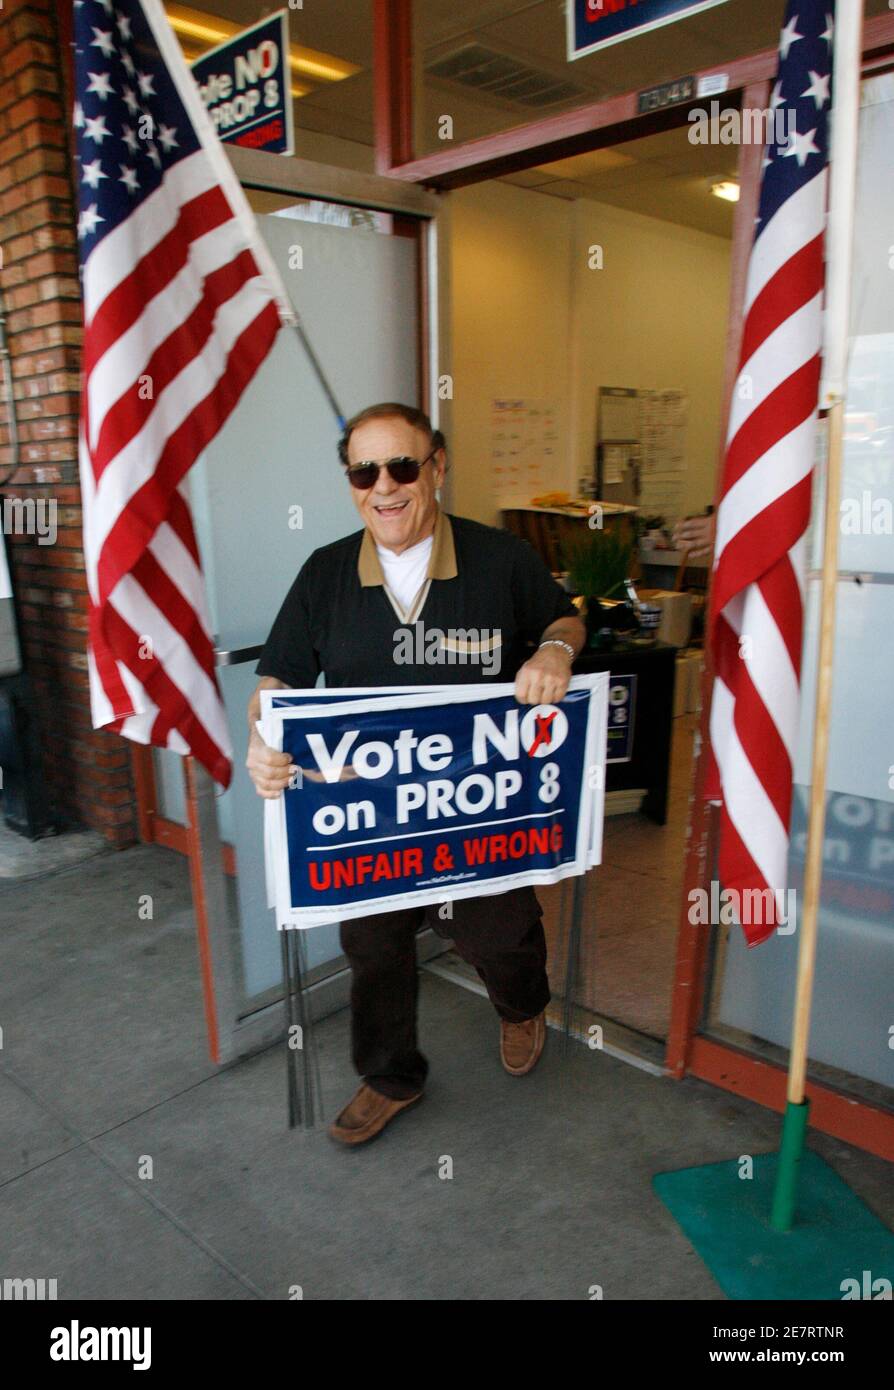 A man who refused to give his name carries a yard sign from the No on 8 proposition headquarters in West Hollywood, California October 29, 2008. Voters in California will be asked on November 4, 2008 to amend their state constitution to recognize marriage as only between a man and a woman, a bid to override a court ruling allowing same-sex unions. Similar proposals will be on the ballot in the battleground states of Arizona and Florida.   REUTERS/Fred Prouser      (UNITED STATES) Stock Photo